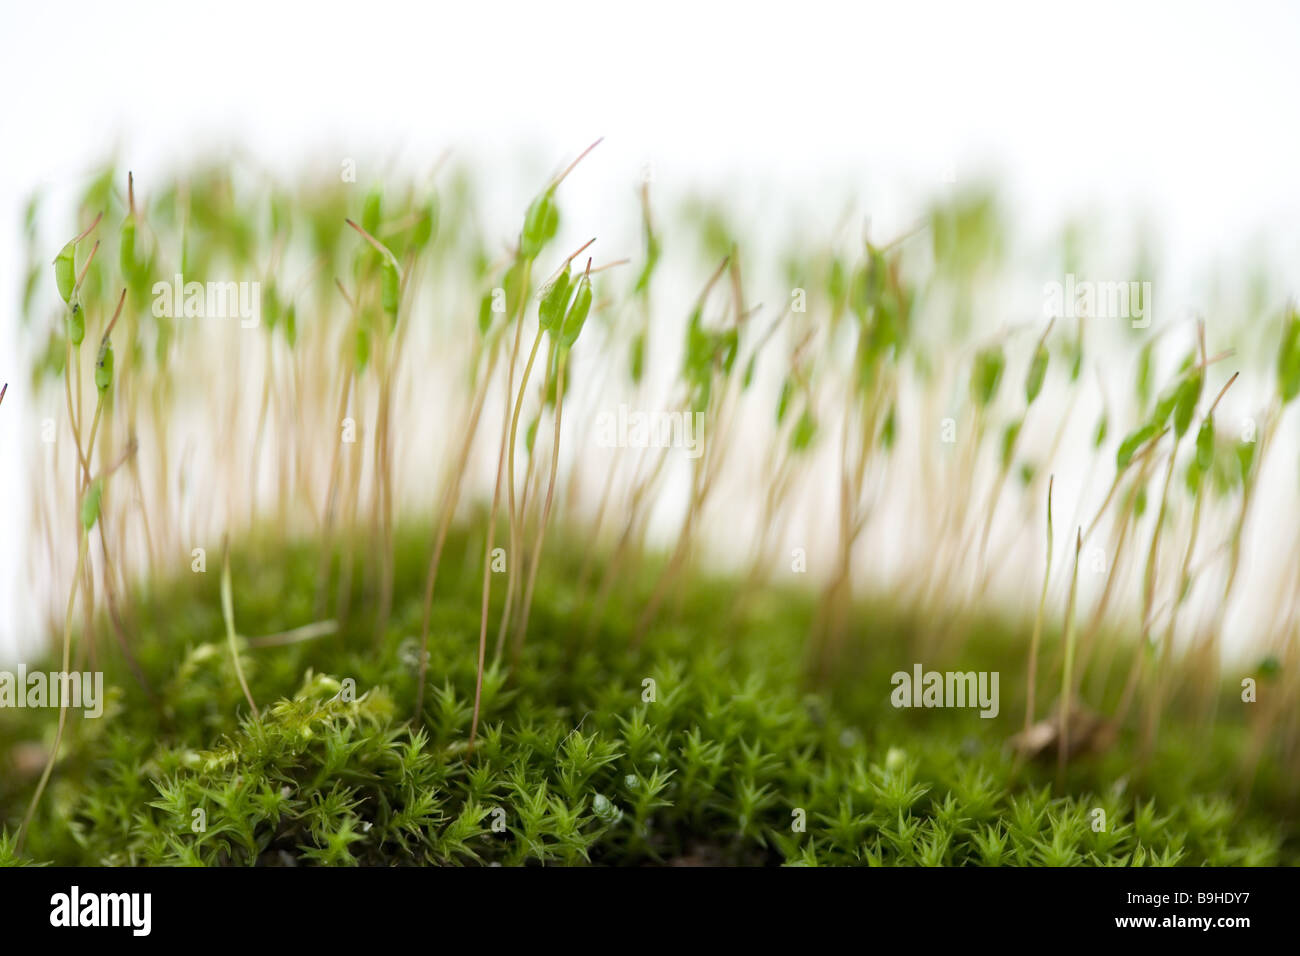 Moss  blooming cut-out  close-up Stock Photo